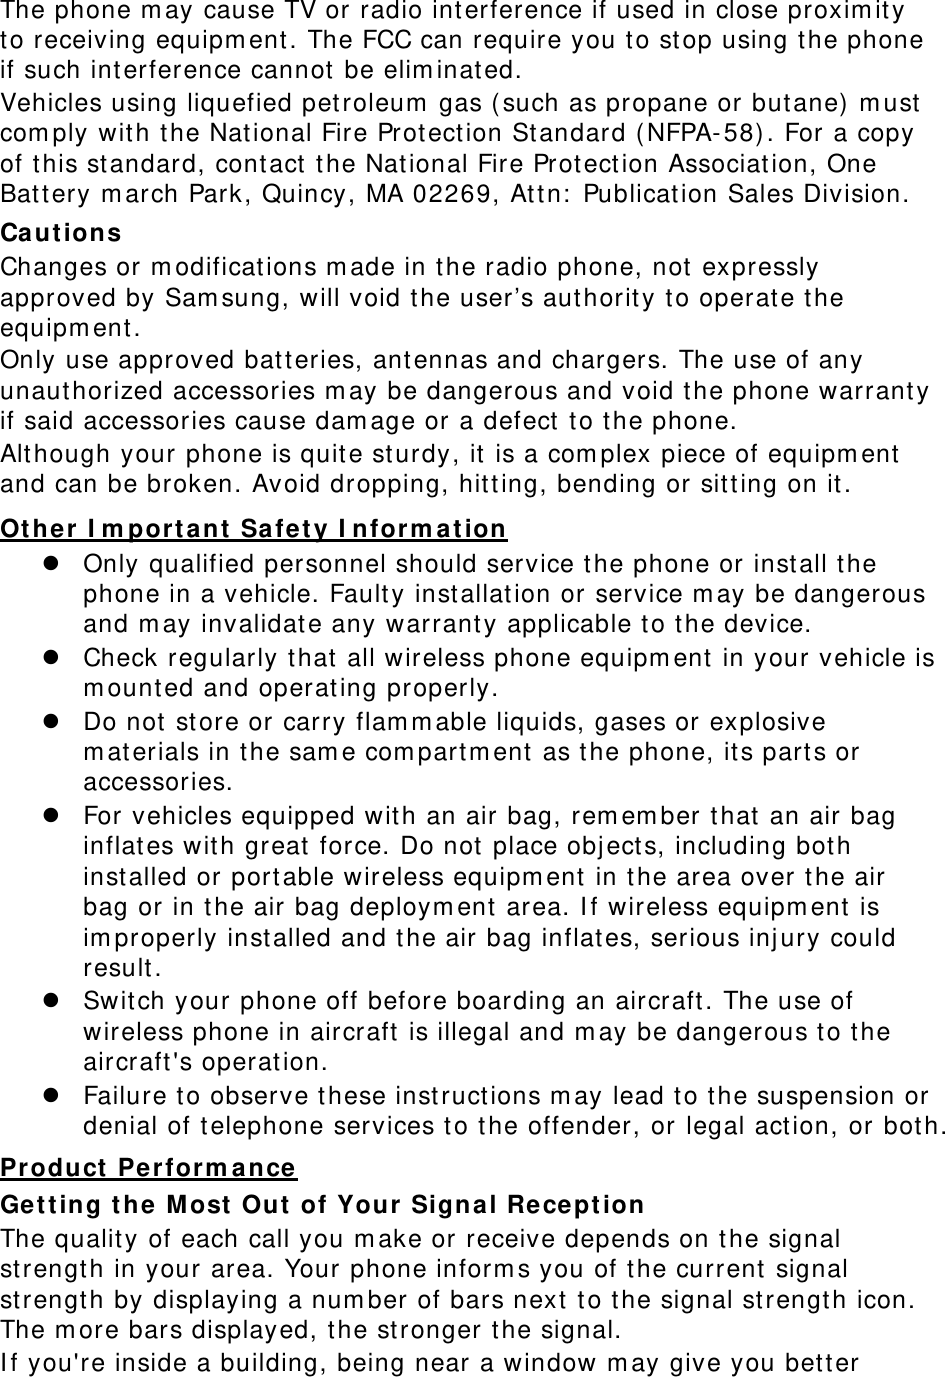    The phone m ay cause TV or radio int erference if used in close proxim ity to receiving equipm ent . The FCC can require you t o stop using the phone if such int erference cannot  be elim inat ed. Vehicles using liquefied petroleum  gas ( such as propane or butane)  m ust com ply wit h the Nat ional Fire Protect ion St andard ( NFPA- 58) . For a copy of t his standard, cont act the Nat ional Fire Protect ion Associat ion, One Battery m arch Park, Quincy, MA 02269, At tn:  Publication Sales Division. Ca ut ion s Changes or m odificat ions m ade in t he radio phone, not expressly approved by Sam sung, will void the user’s aut hority to operate t he equipm ent. Only use approved batt eries, ant ennas and chargers. The use of any unaut horized accessories m ay be dangerous and void t he phone warrant y if said accessories cause dam age or a defect to the phone. Alt hough your phone is quit e st urdy, it is a com plex piece of equipm ent  and can be broken. Avoid dropping, hitt ing, bending or sitting on it . UOt he r I m portant  Safety I nform ation z Only qualified personnel should service the phone or install t he phone in a vehicle. Fault y inst allat ion or service m ay be dangerous and m ay invalidate any warrant y applicable t o the device. z Check regularly that  all wireless phone equipm ent  in your vehicle is m ounted and operating properly. z Do not st ore or carry flam m able liquids, gases or explosive m aterials in t he sam e com part m ent  as t he phone, its part s or accessories. z For vehicles equipped with an air bag, rem em ber that  an air bag inflates with great  force. Do not place obj ects, including bot h installed or port able wireless equipm ent in t he area over the air bag or in the air bag deploym ent area. I f wireless equipm ent  is im properly inst alled and t he air bag inflates, serious inj ury could result. z Swit ch your phone off before boarding an aircraft . The use of wireless phone in aircraft  is illegal and m ay be dangerous t o the aircraft &apos;s operation. z Failure to observe t hese instructions m ay lead t o the suspension or denial of telephone services t o t he offender, or legal act ion, or bot h. UProduct  Perform ance Gett ing t he Most  Out of Your  Signal Re cept ion The quality of each call you m ake or receive depends on t he signal strengt h in your area. Your phone inform s you of t he current  signal strengt h by displaying a num ber of bars next  t o the signal st rengt h icon. The m ore bars displayed, t he stronger t he signal. I f you&apos;re inside a building, being near a window m ay give you bet ter 